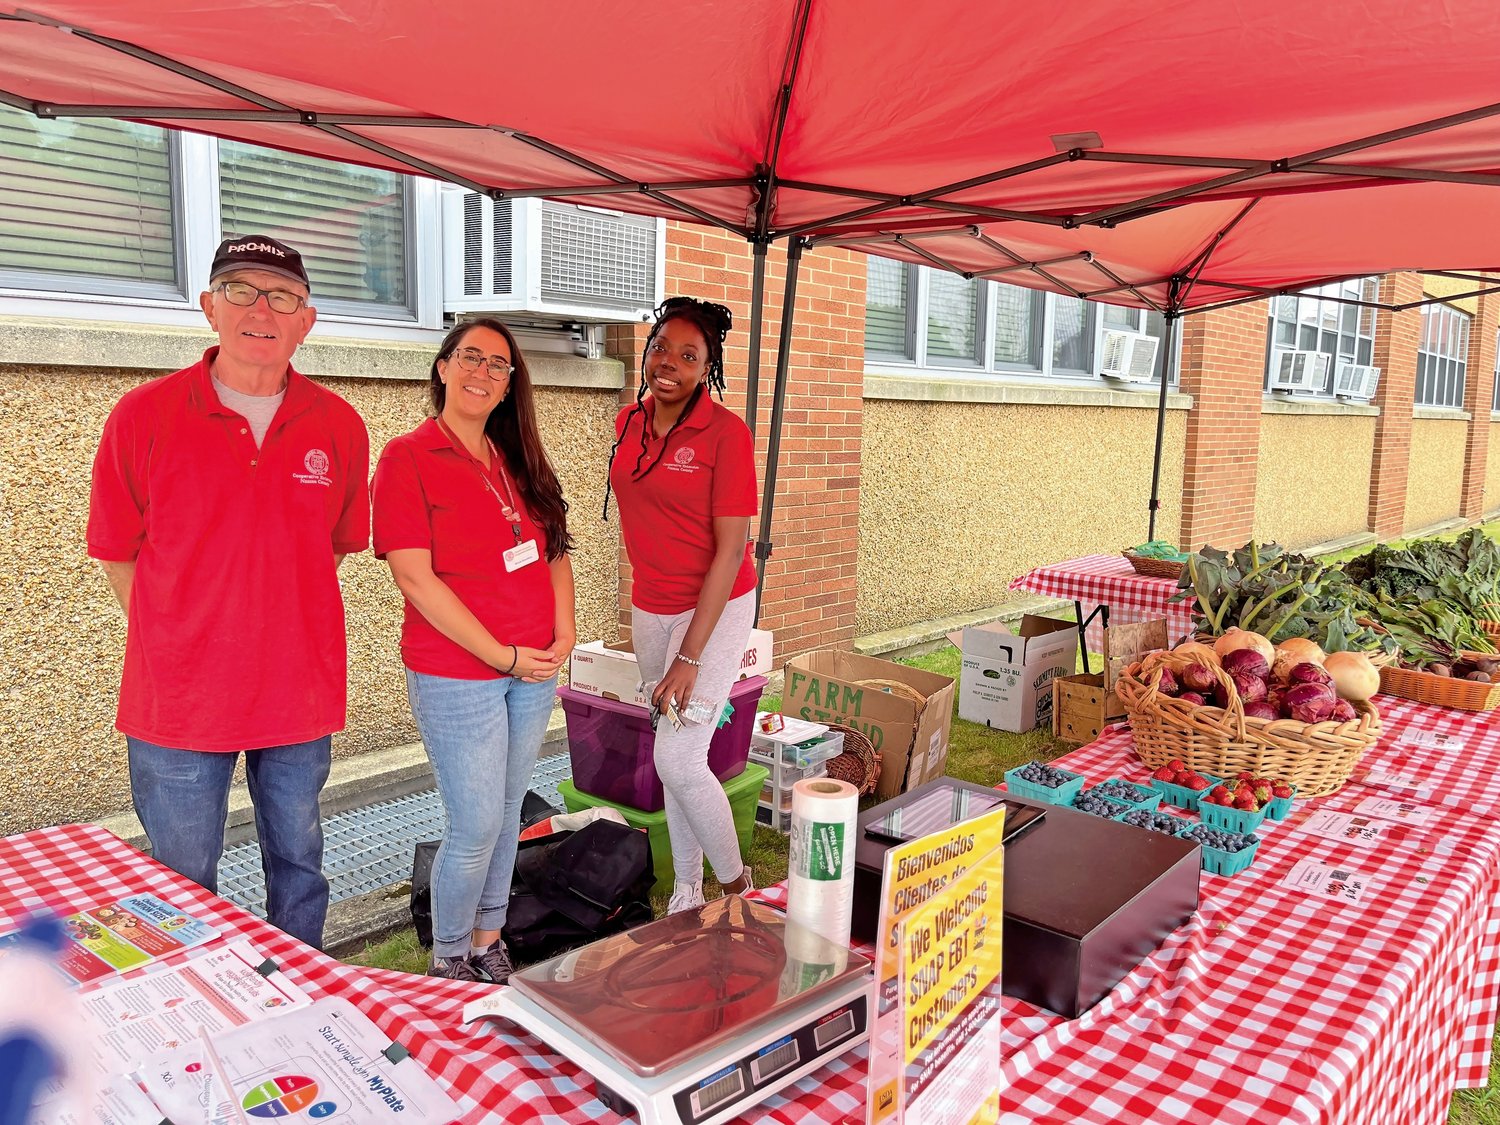 Cooperative Extension of Nassau County farmer Bill Walsh, Supervising Community Nutrition Educator Nicole Borukhov and Imani Jackson ran the first of many Tuesday farm markets at the Five Towns Community Center in Lawrence on June 21.